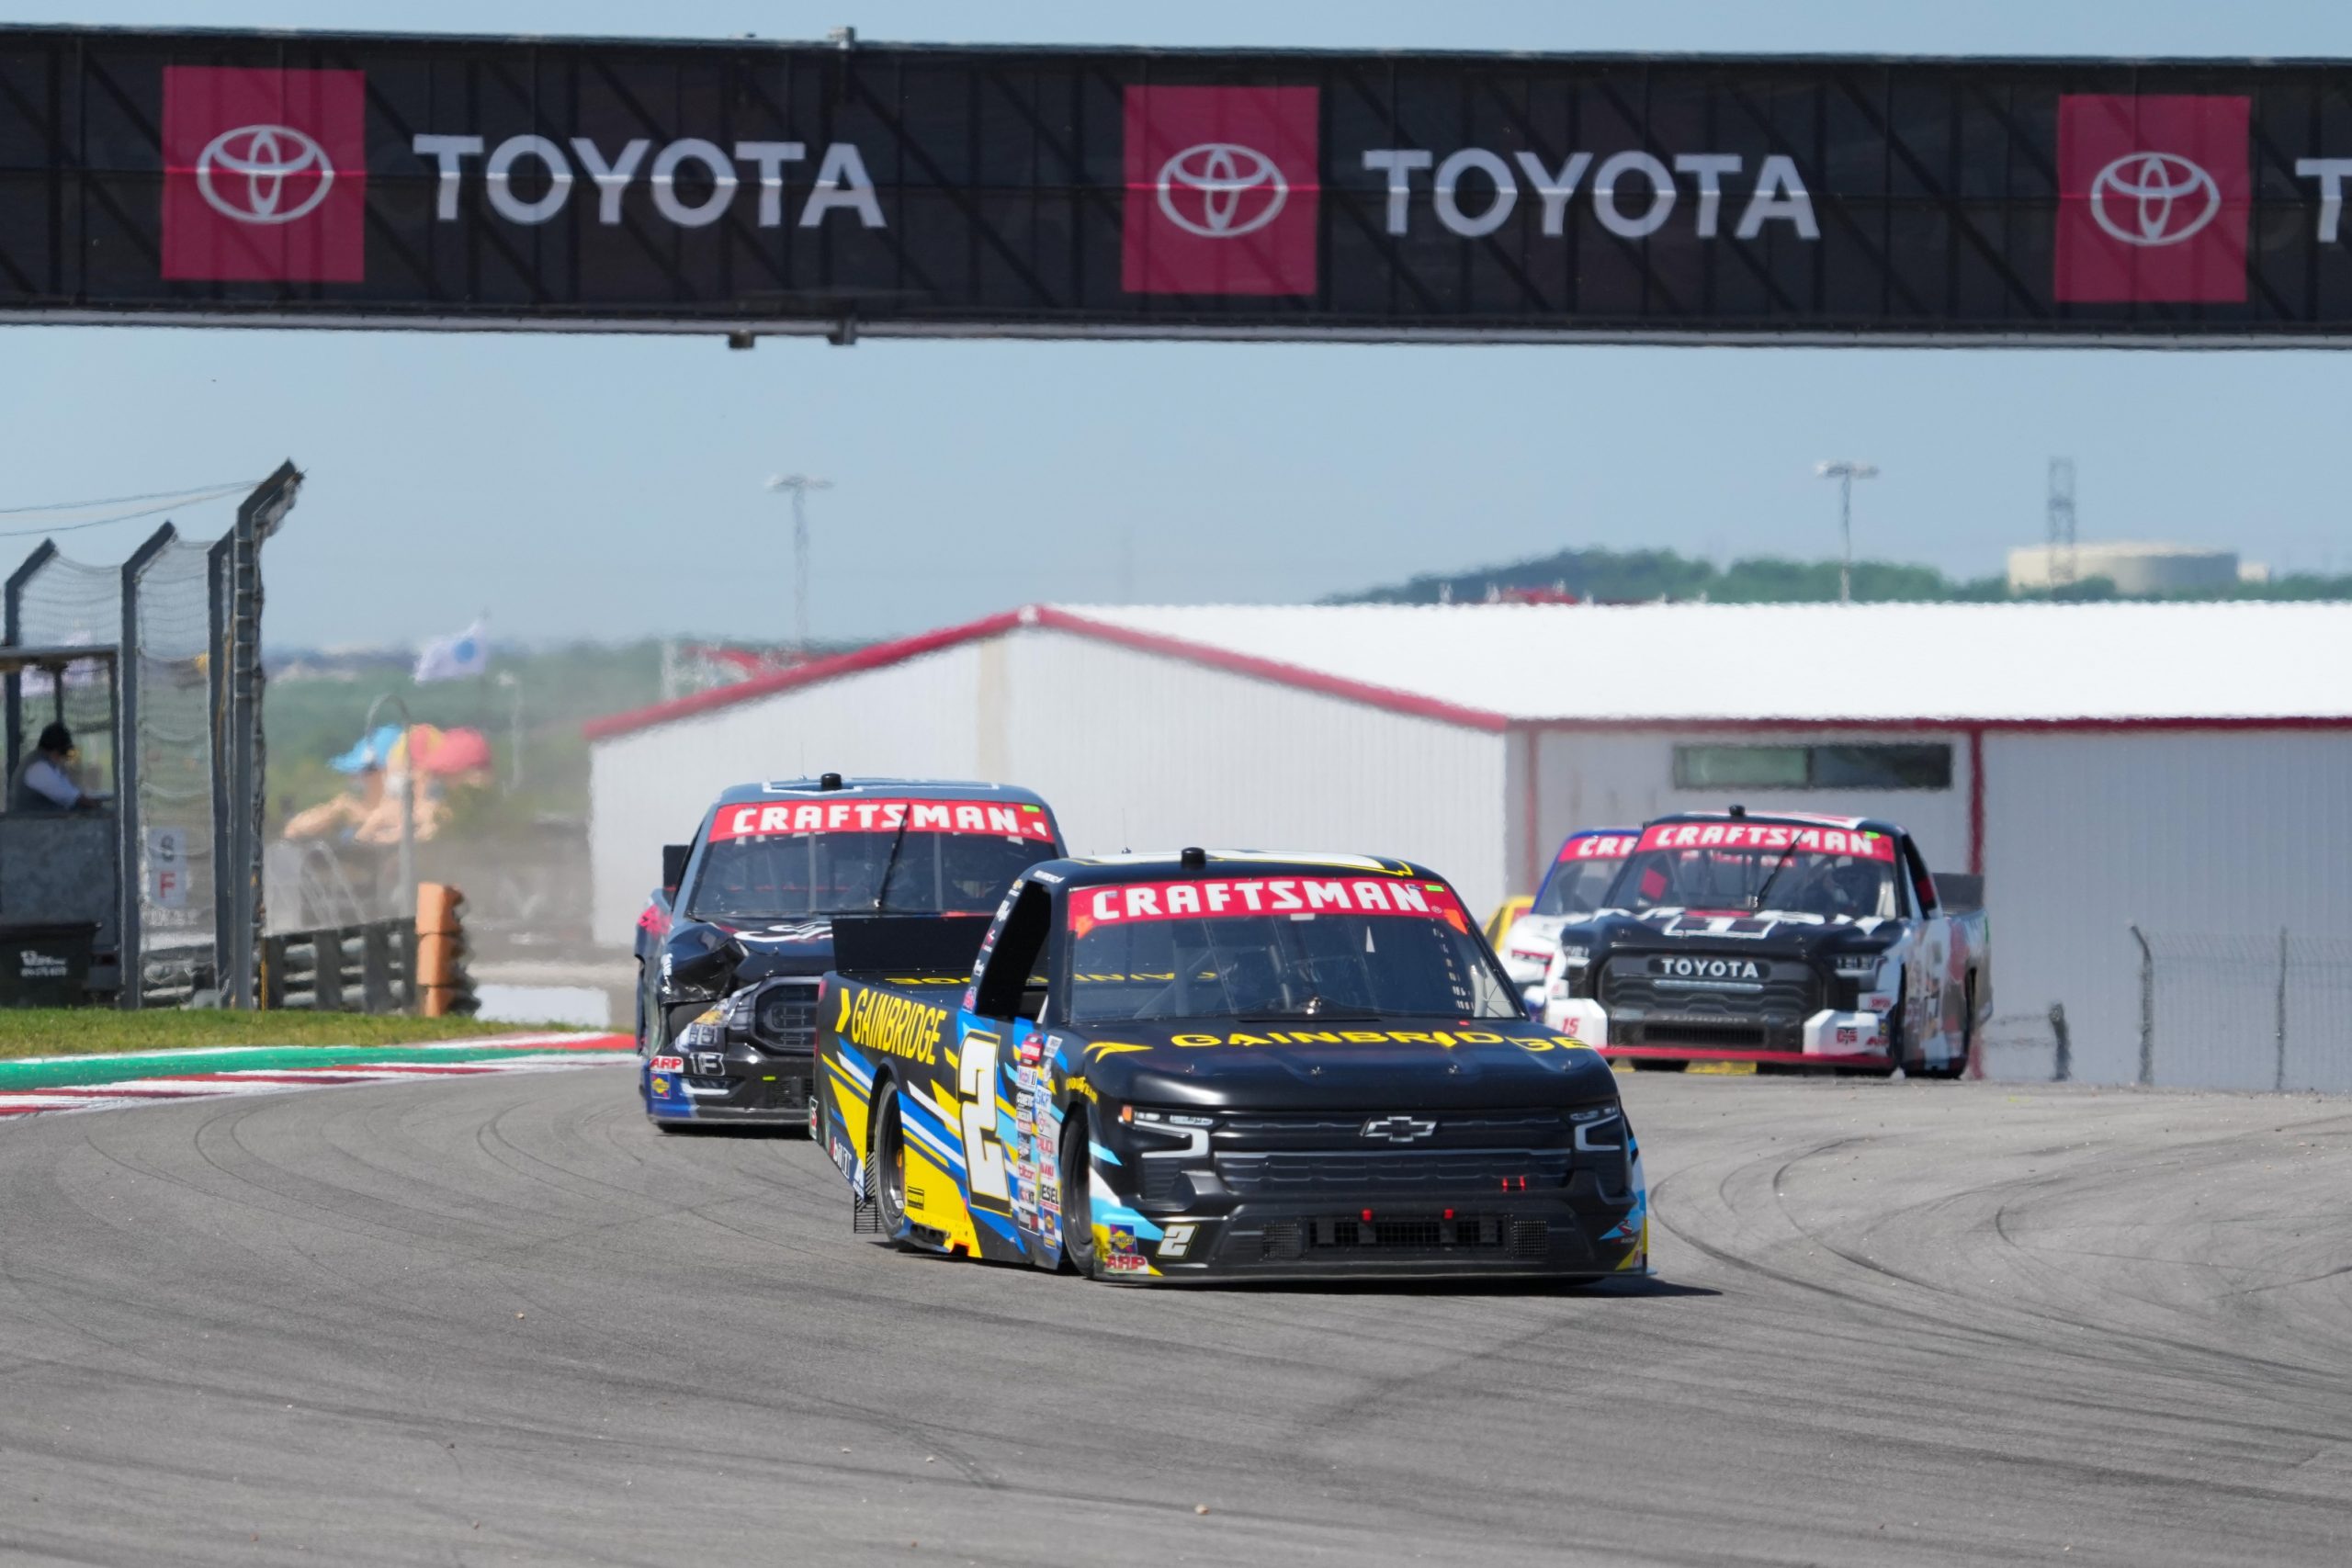 Mar 25, 2023; Austin, Texas, USA; NASCAR Craftsman Truck Series driver Nick Sanchez (2) comes out of a curve at Circuit of the Americas. Mandatory Credit: Daniel Dunn-USA TODAY Sports